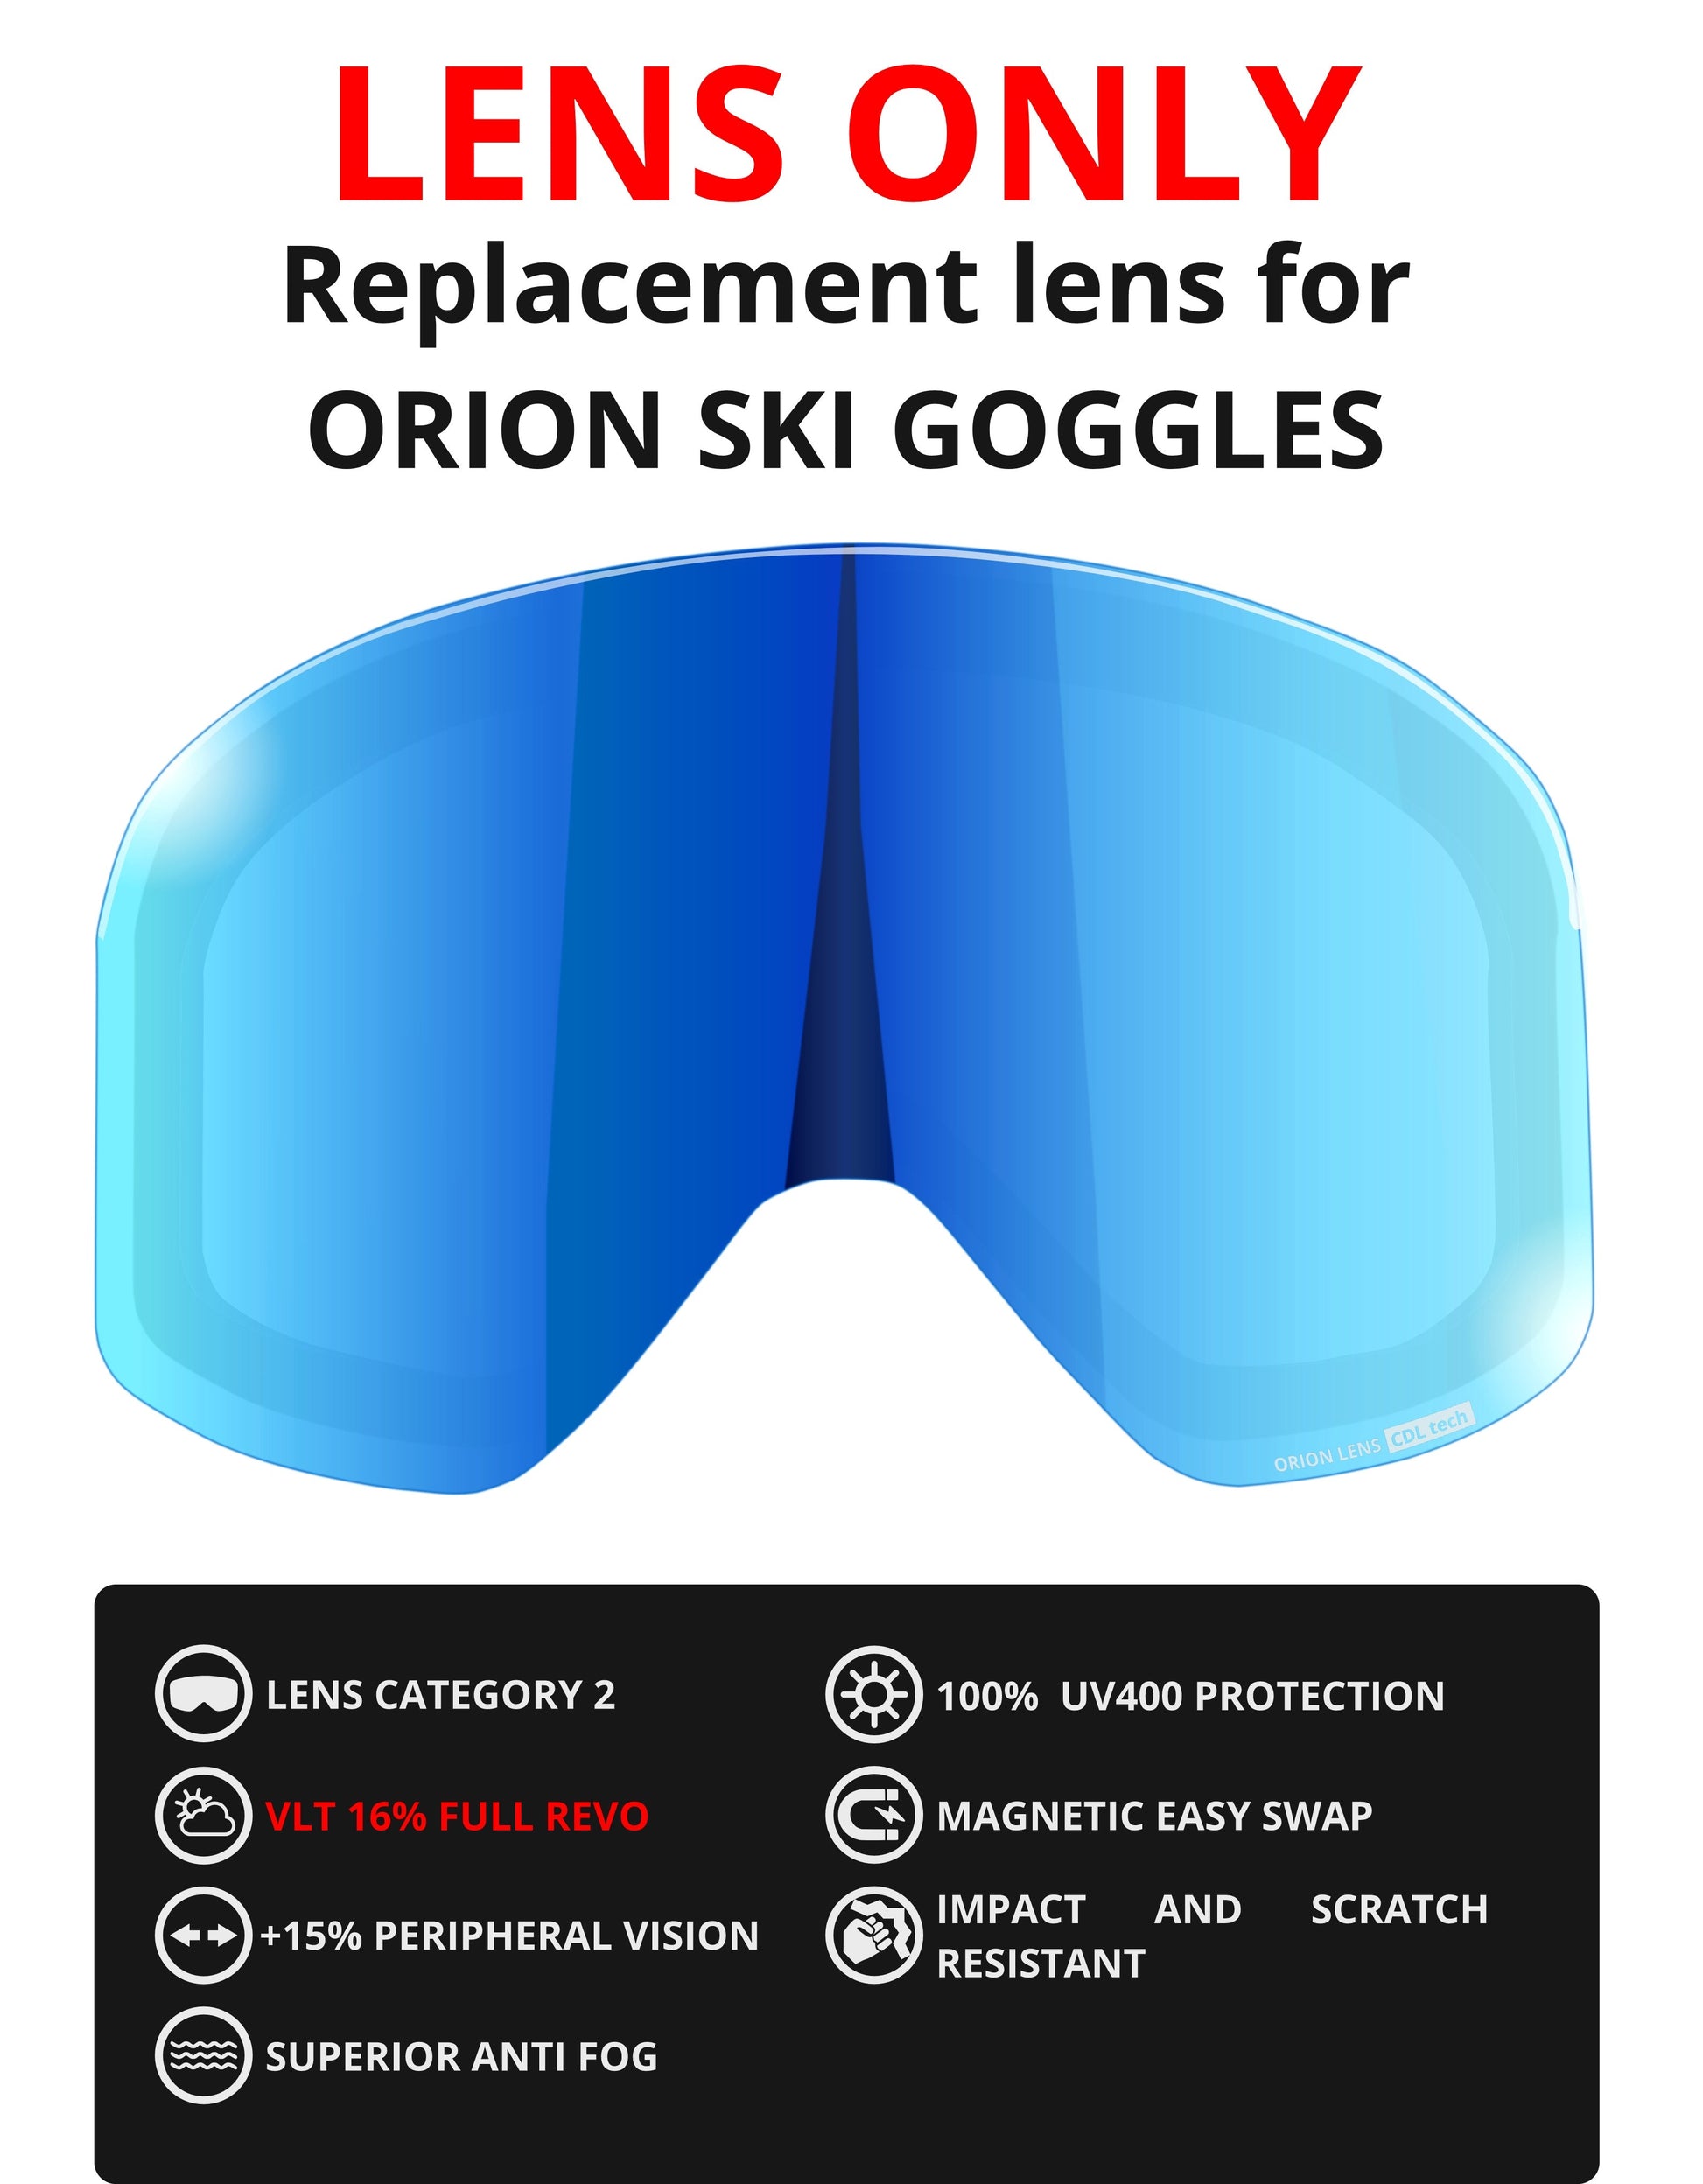 LENS ONLY - FULL REVO replacement lens for 6fiftyfive Orion ski goggles for men and women - VLT 16% - ICE BLUE - 6fiftyfive